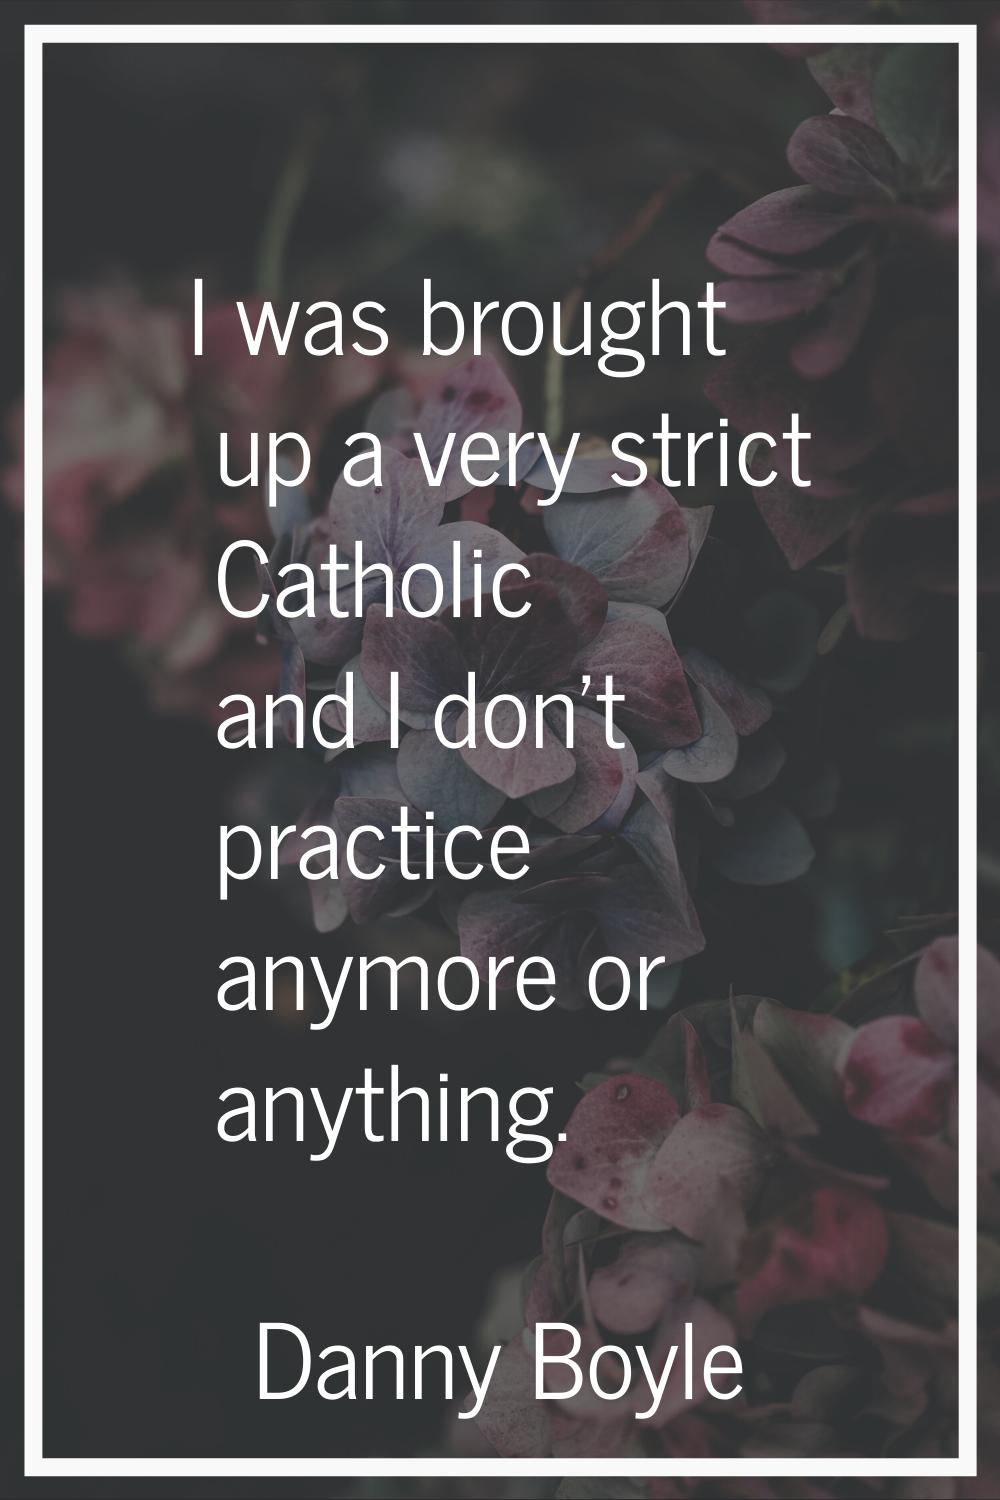 I was brought up a very strict Catholic and I don't practice anymore or anything.